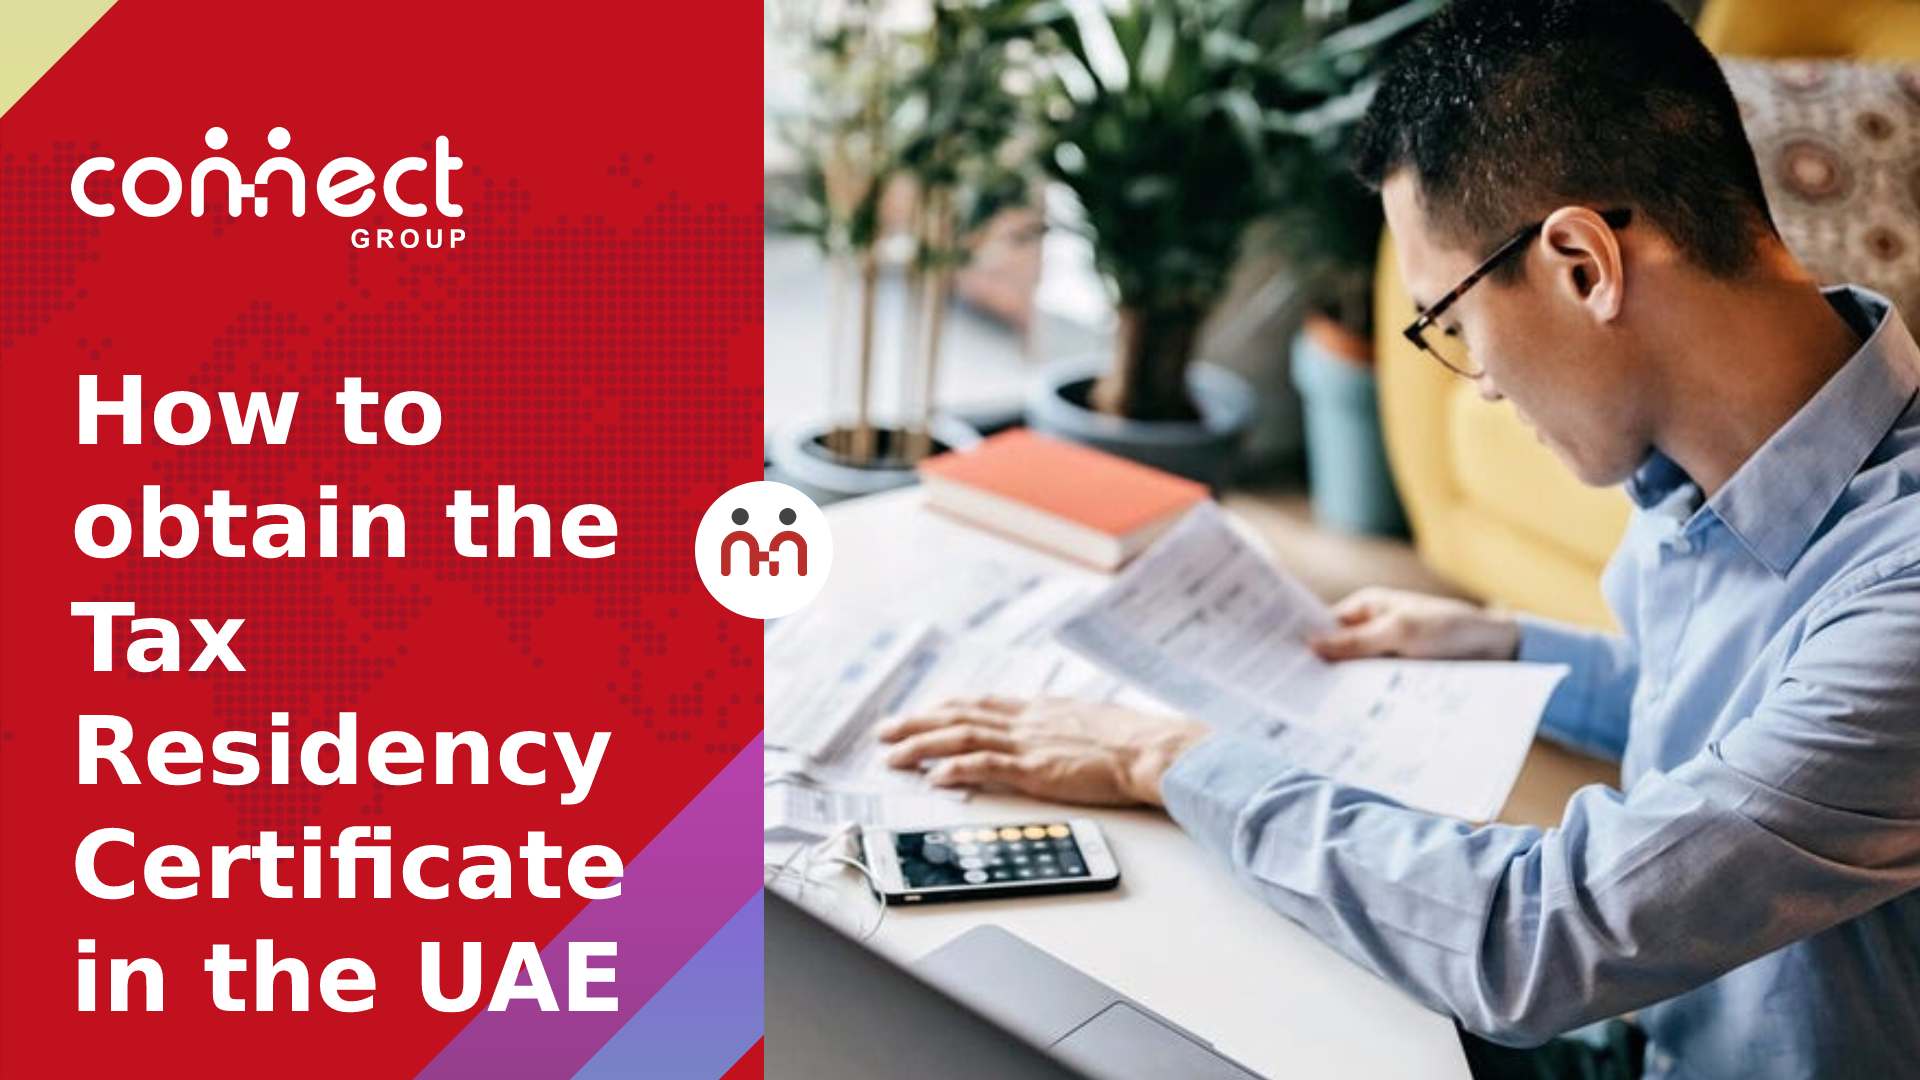 How to obtain the Tax Residency Certificate in the UAE